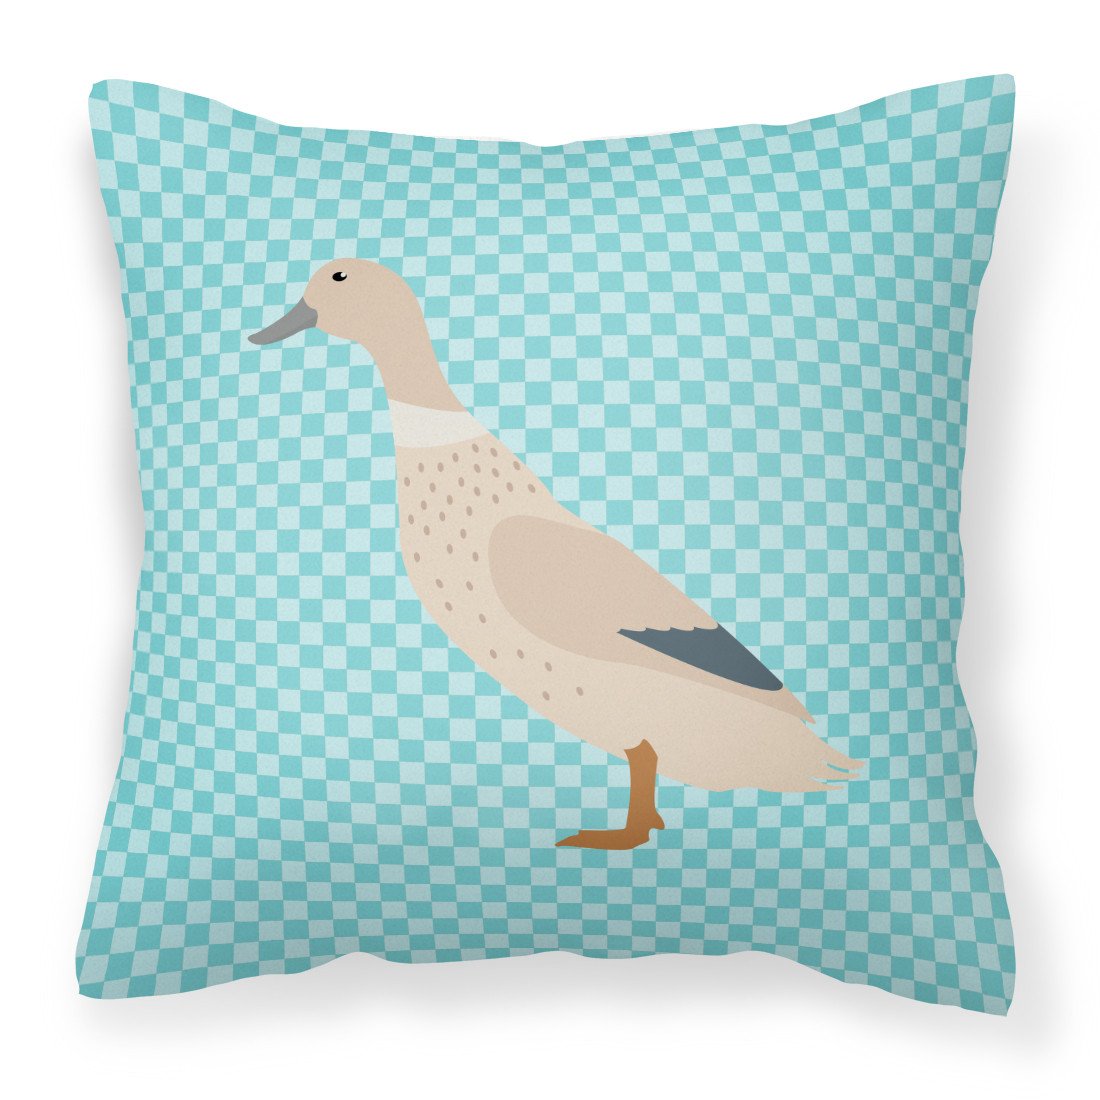 West Harlequin Duck Blue Check Fabric Decorative Pillow BB8032PW1818 by Caroline's Treasures